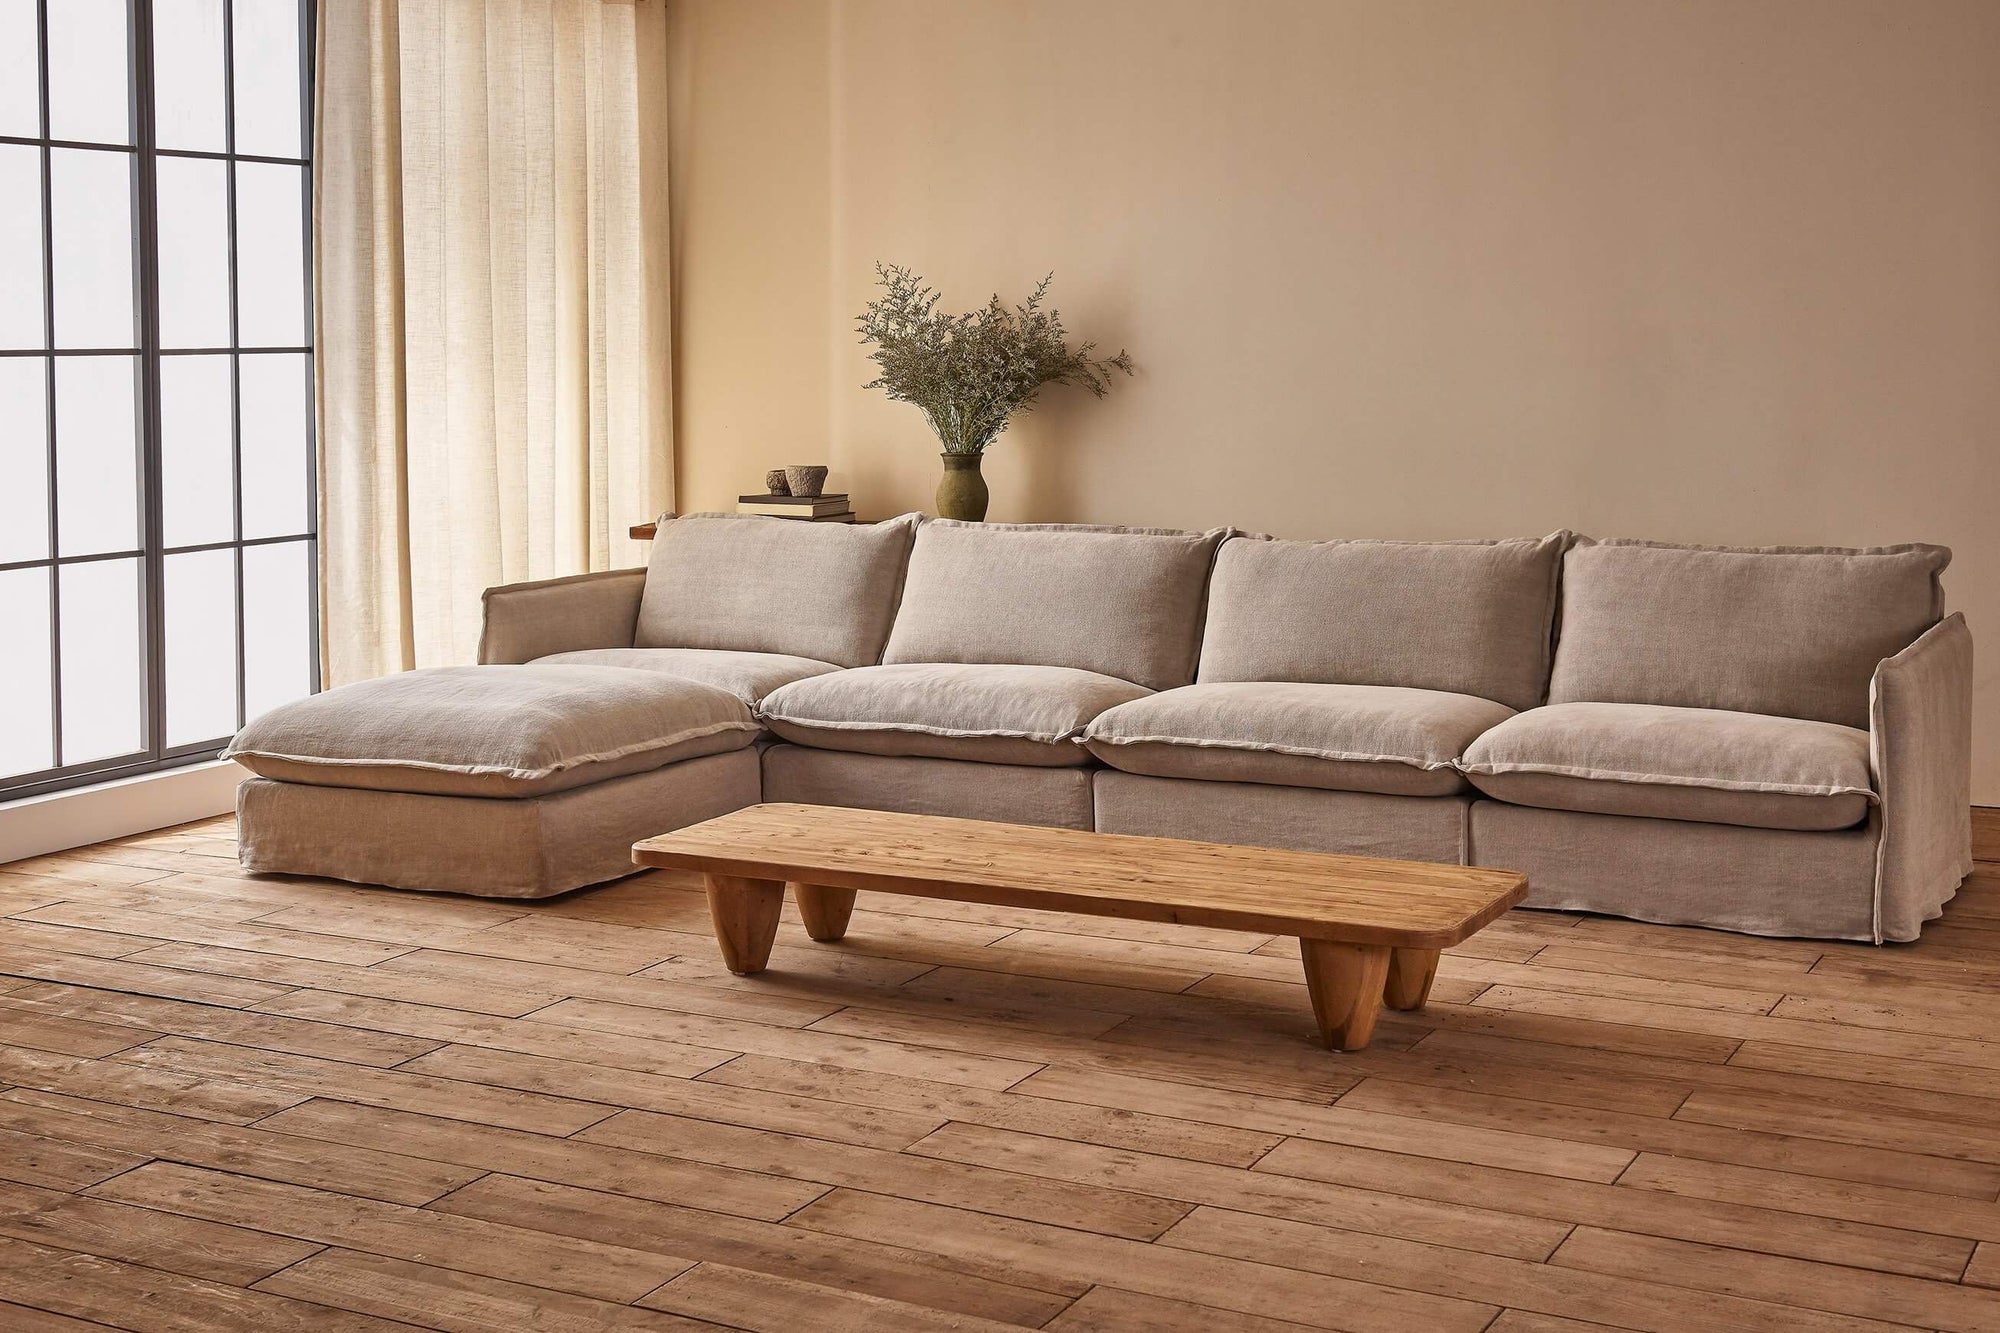 Neva 5-piece Chaise Sectional Sofa in Jasmine Rice, a light warm greige Medium Weight Linen, placed in a room with the Theo Coffee Table